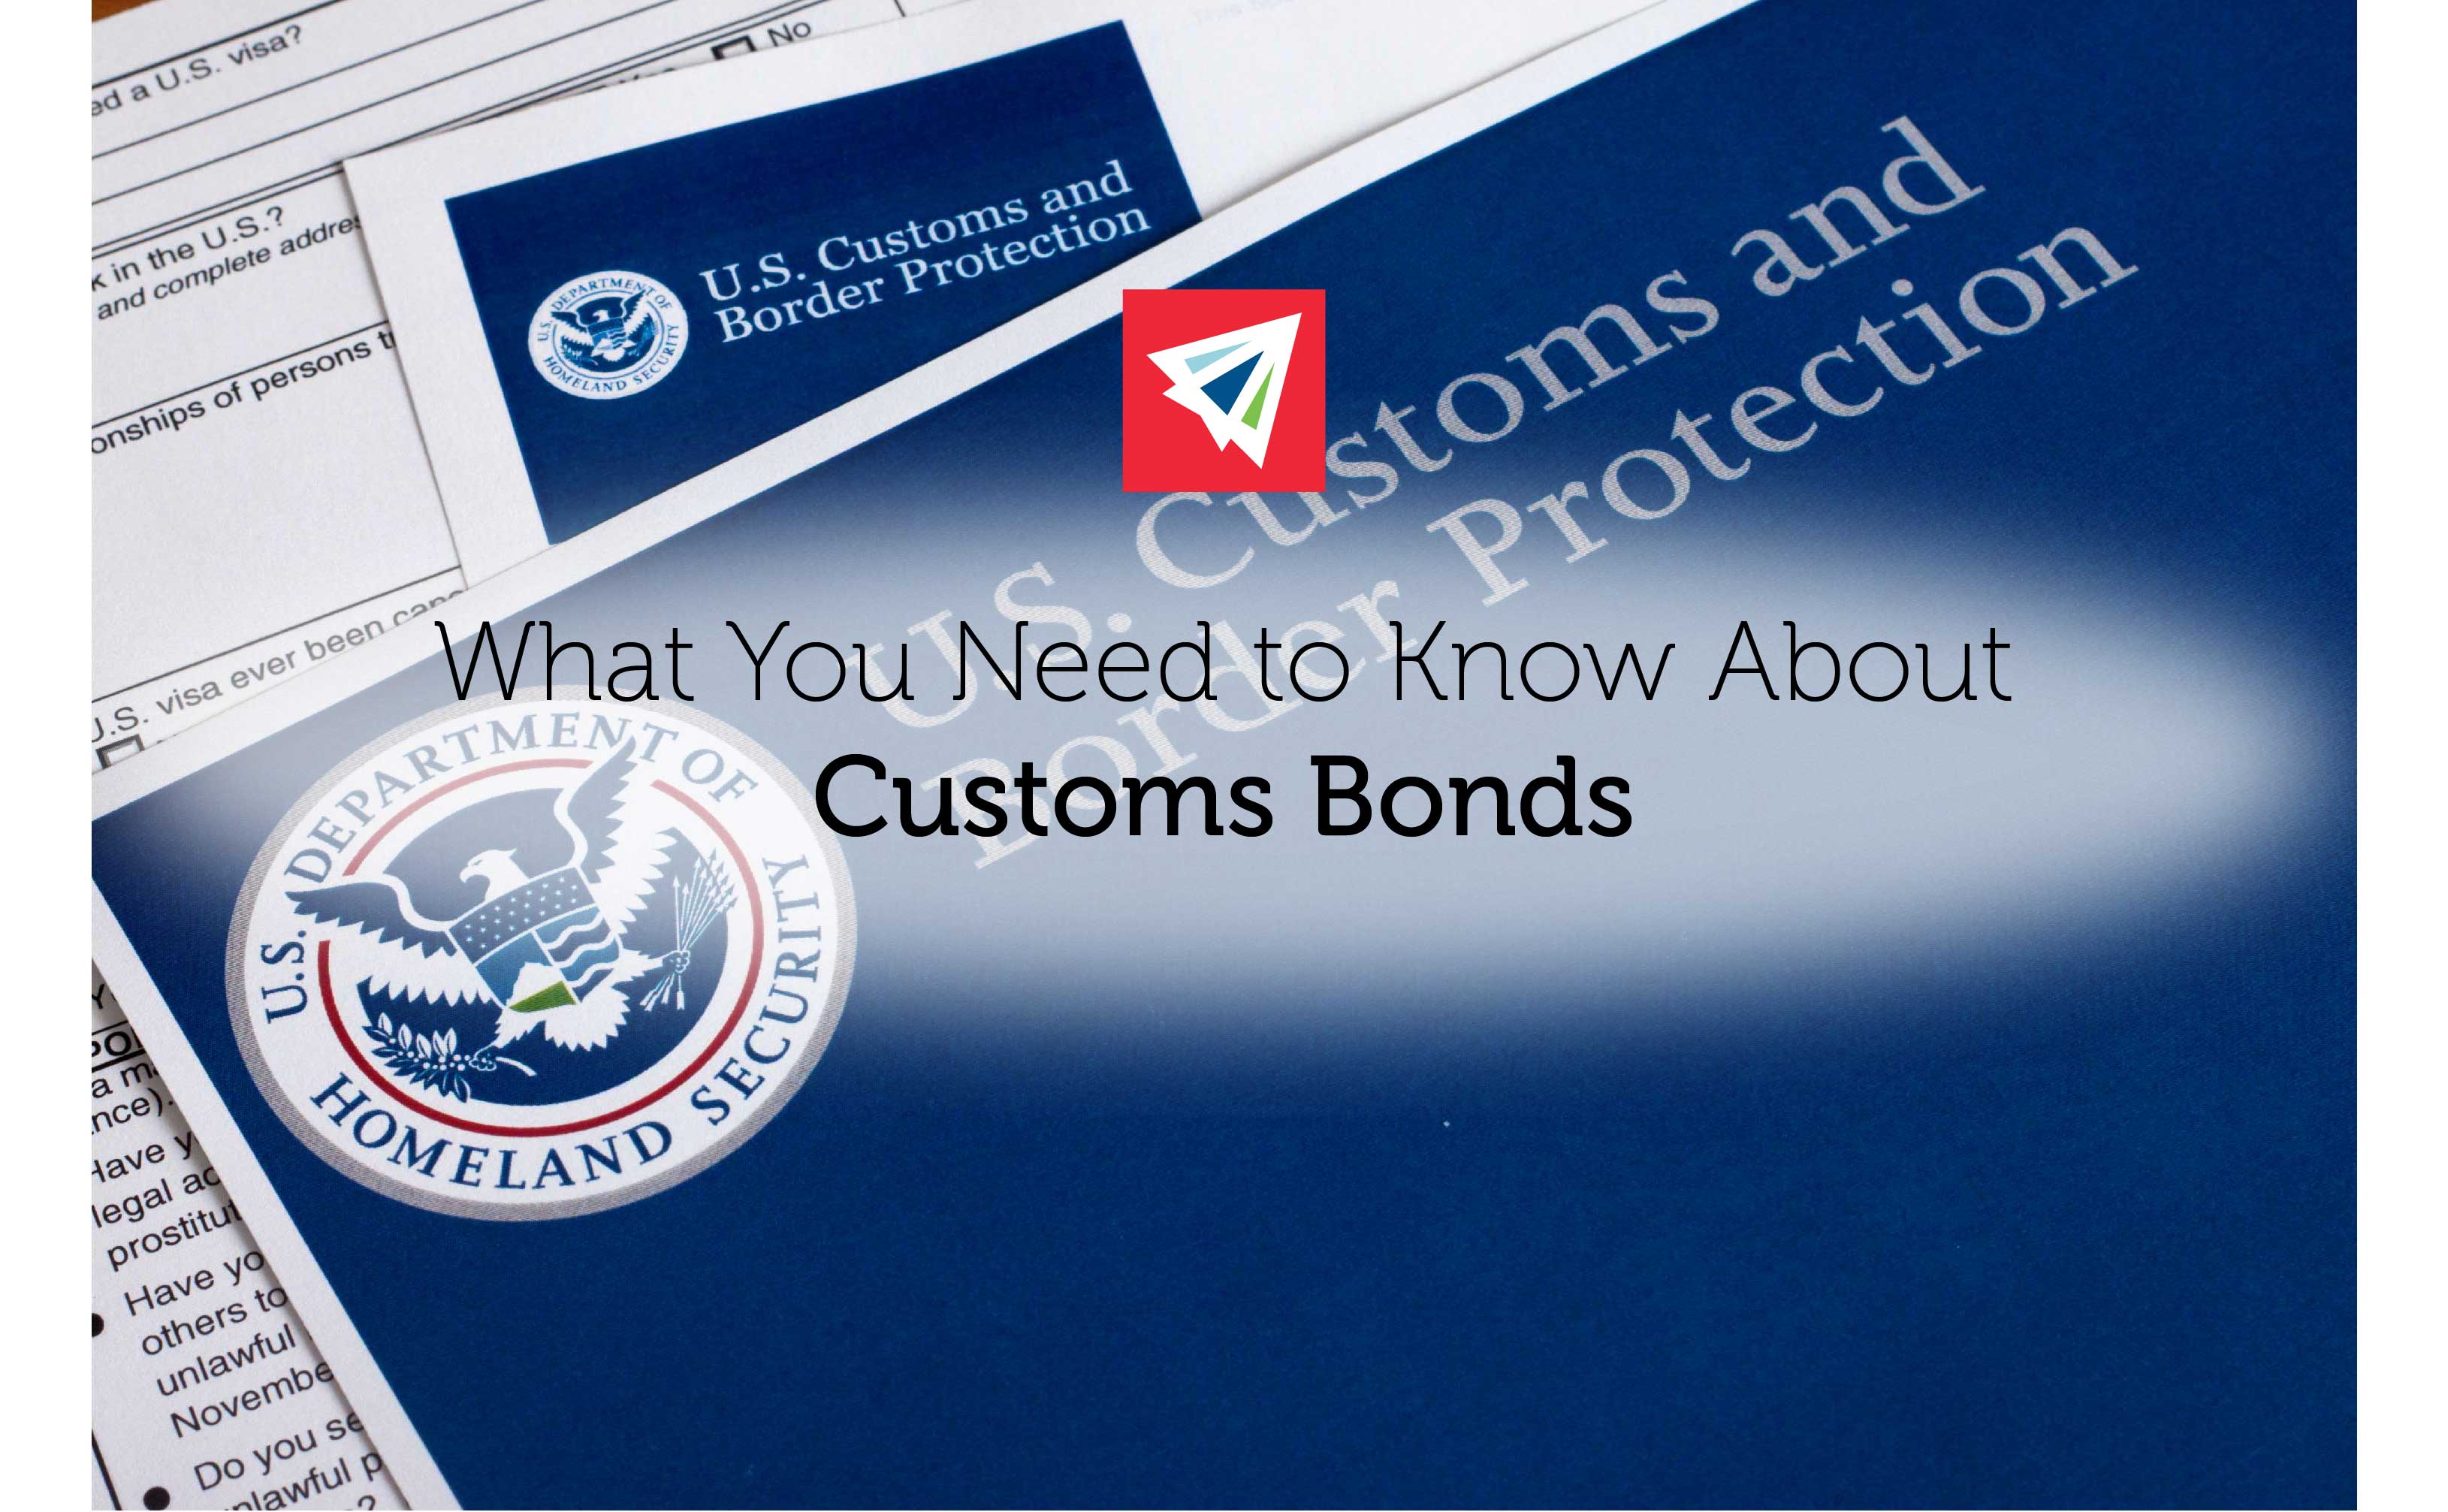 Customs Bonds - What You Need To Know